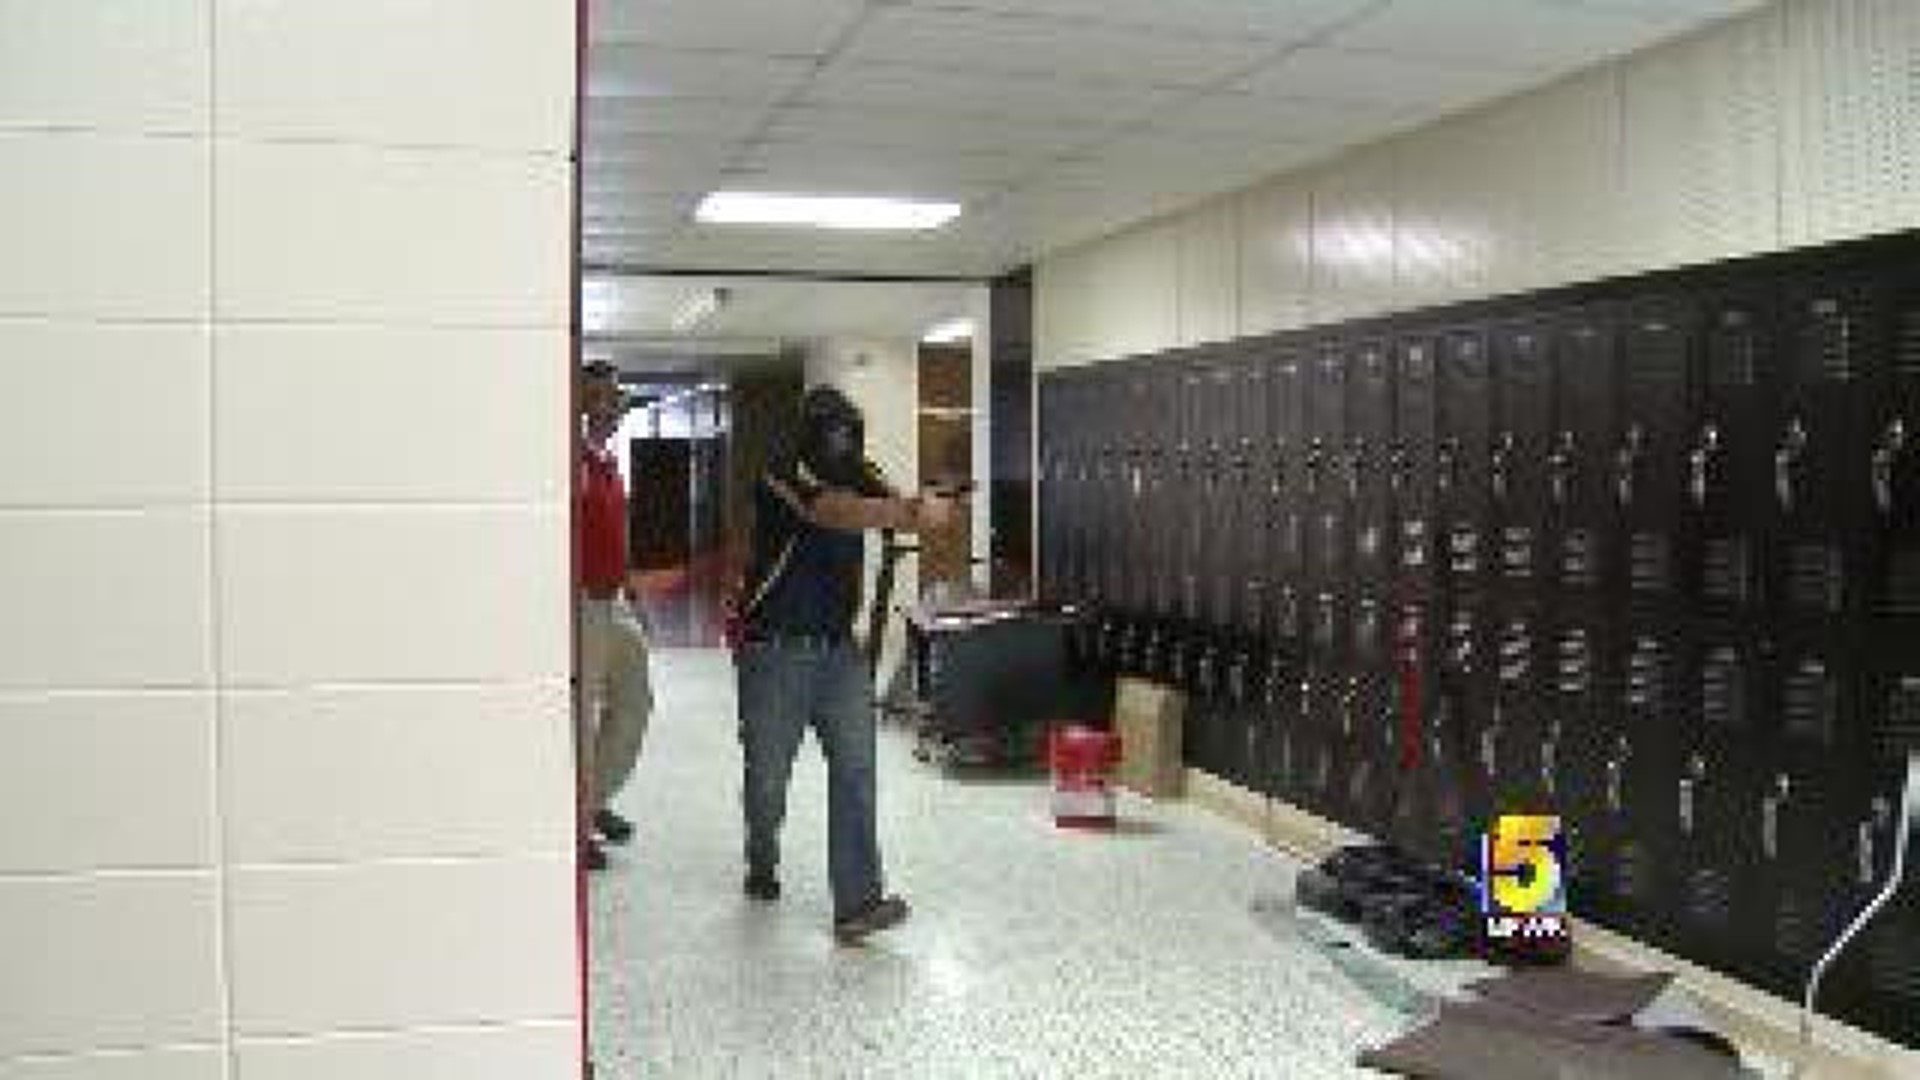 Clarksville Schools to Arm Staff Once Licenses Approved